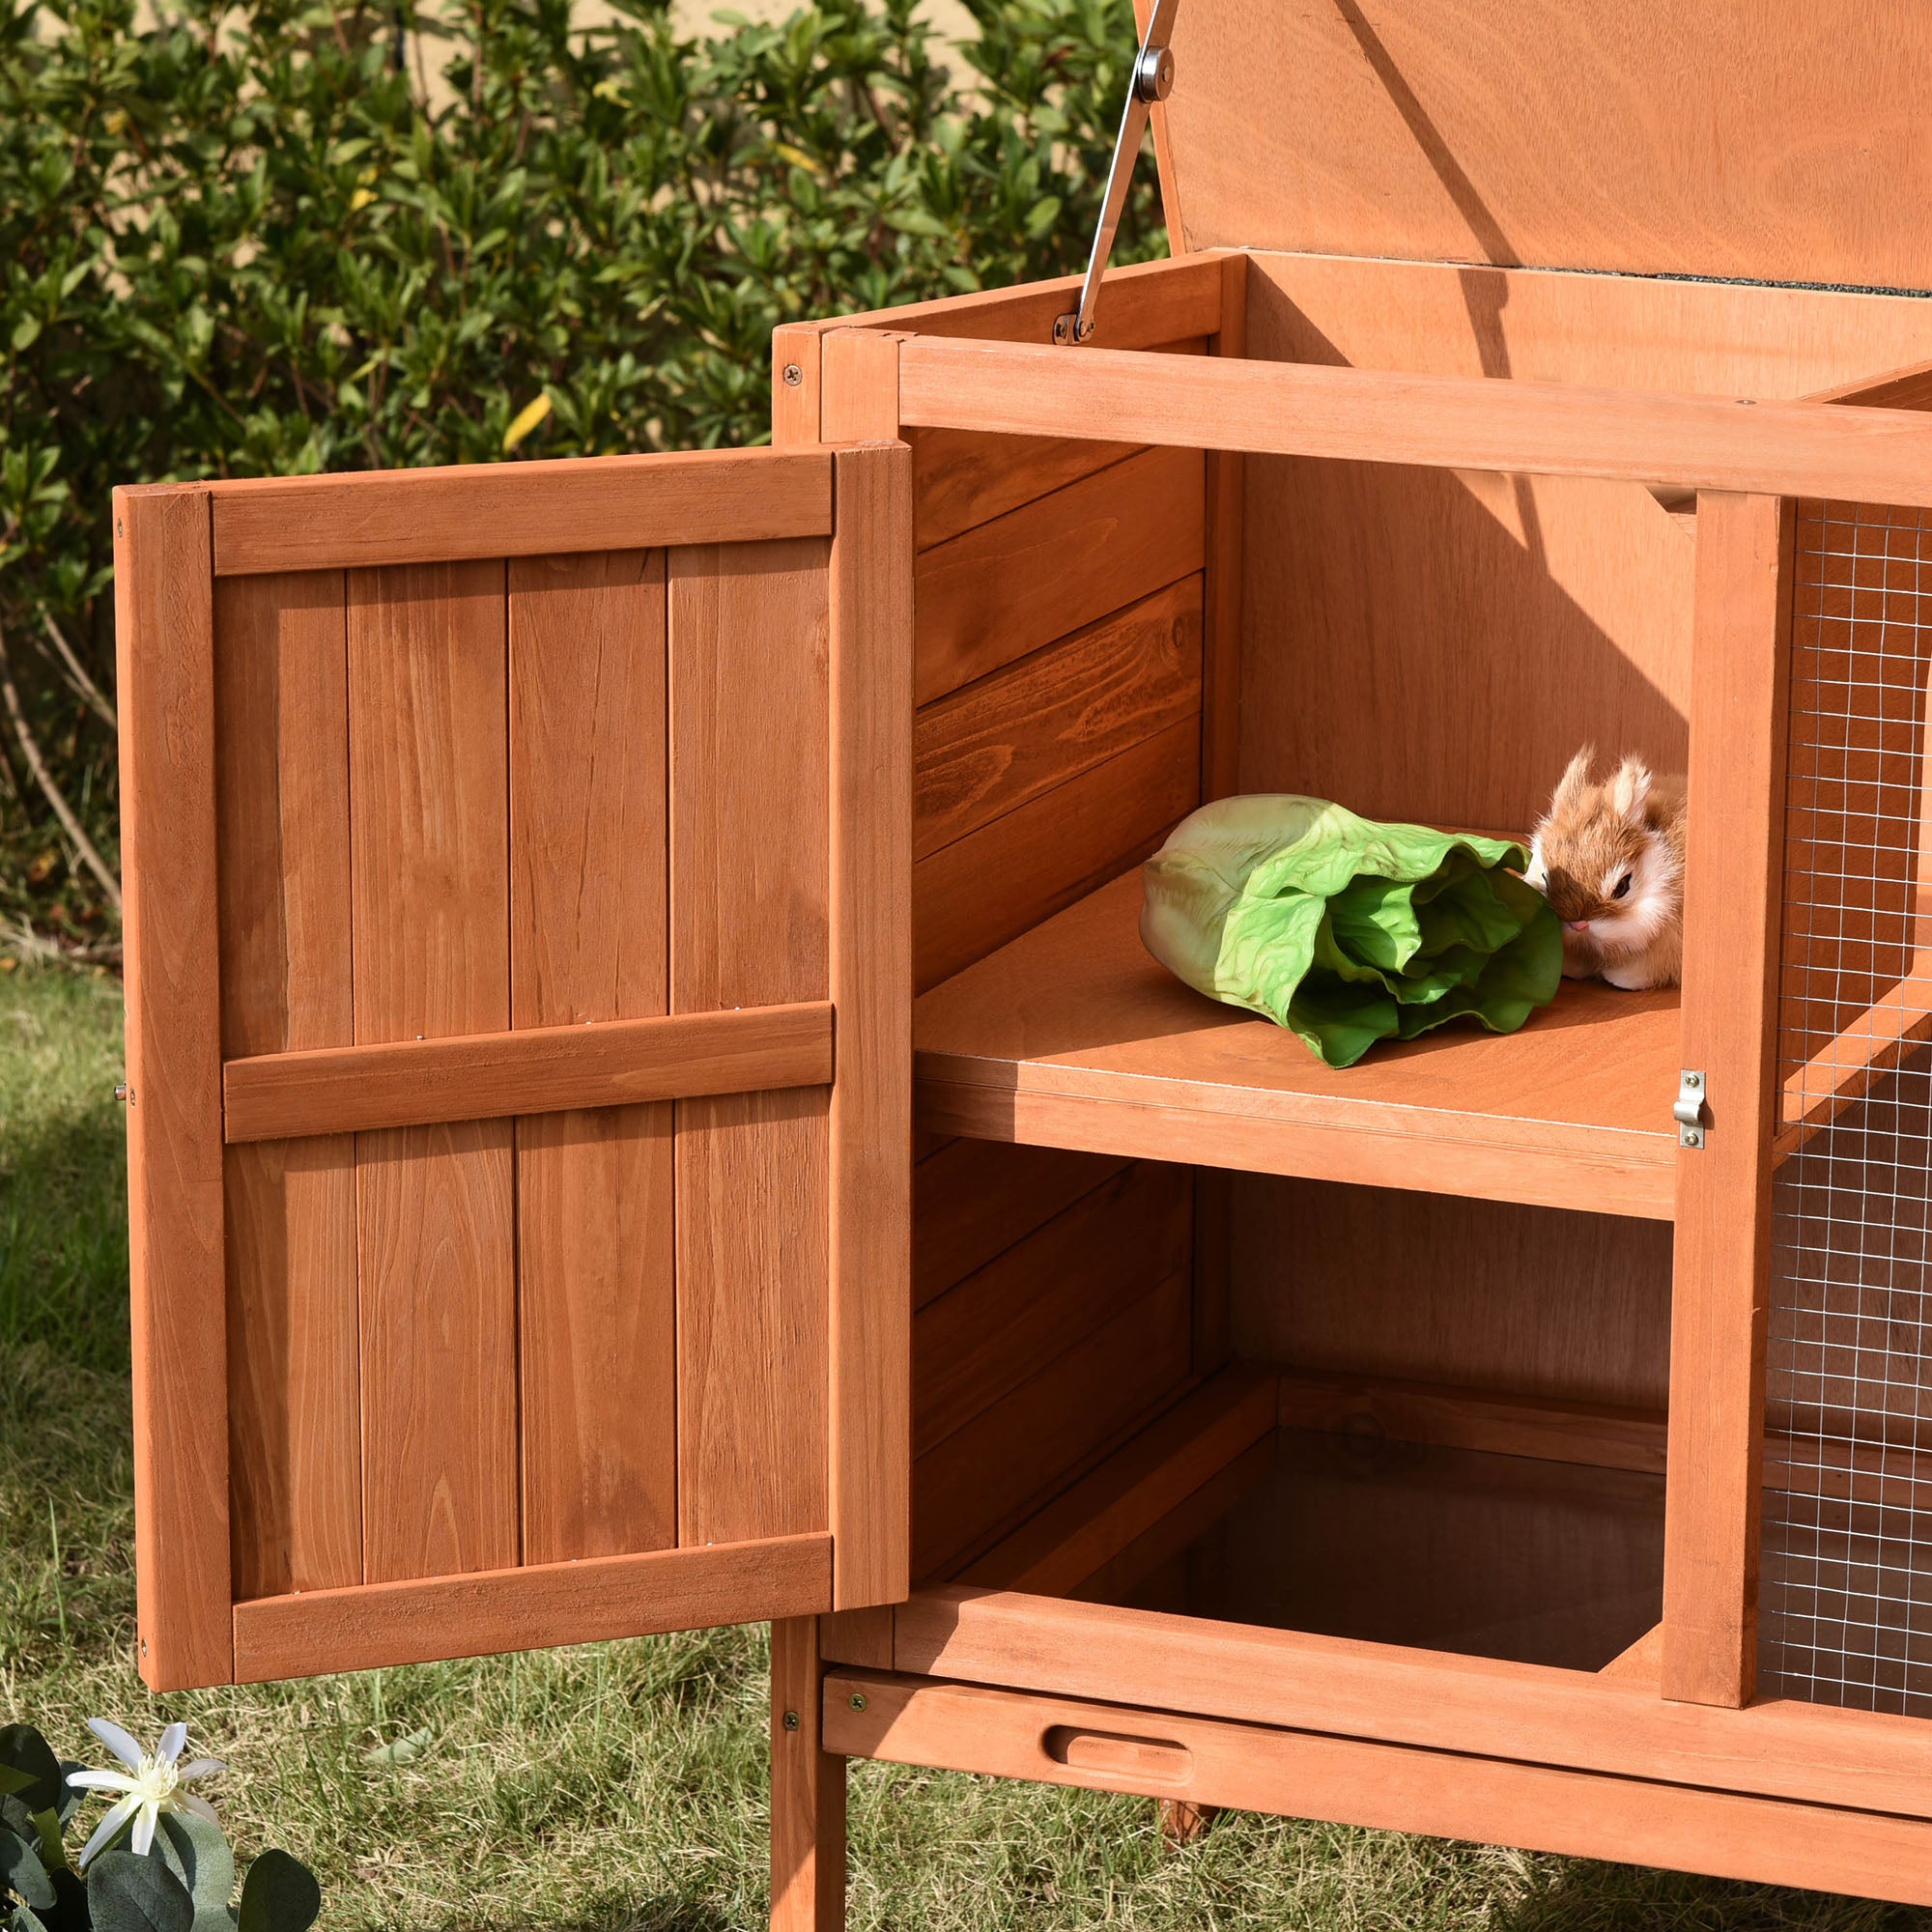 Wooden Rabbit Hutch Elevated Pet Bunny House with Slide-Out Tray Openable Roof